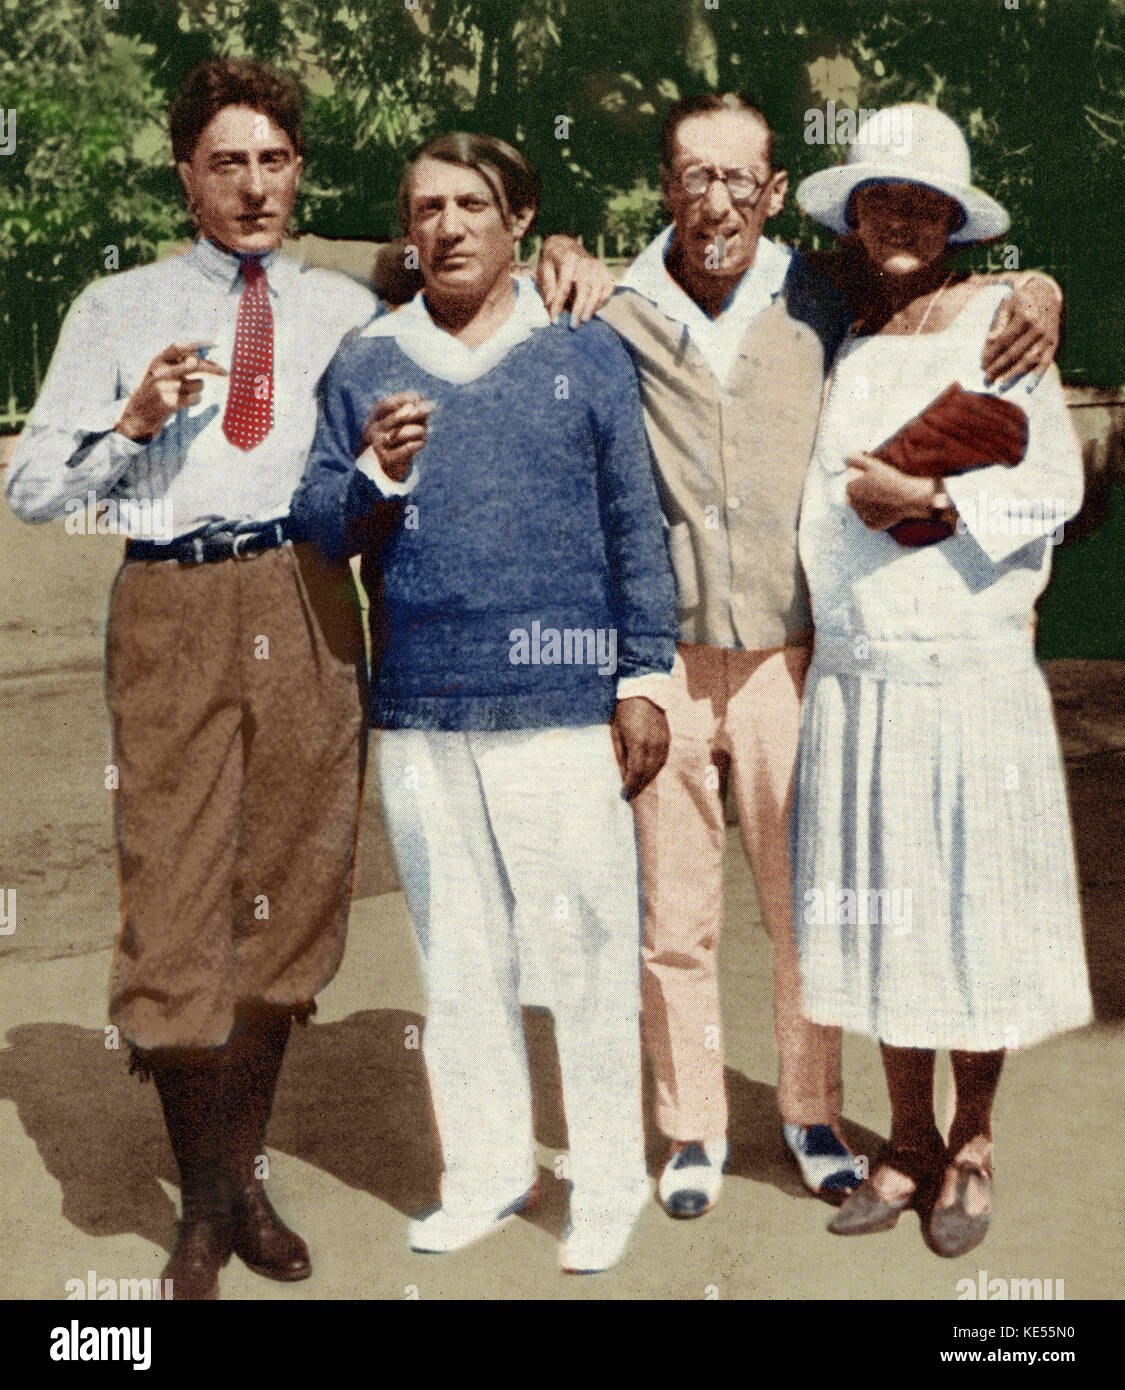 Igor Stravinsky with Cocteau and Picasso in Antibes 1926 from l to r. Jean Cocteau, Pablo Picasso, Igor Stravinsky & Olga Picasso. Associated with the Ballet Russe de Diaghilev. Colourised version. Stock Photo